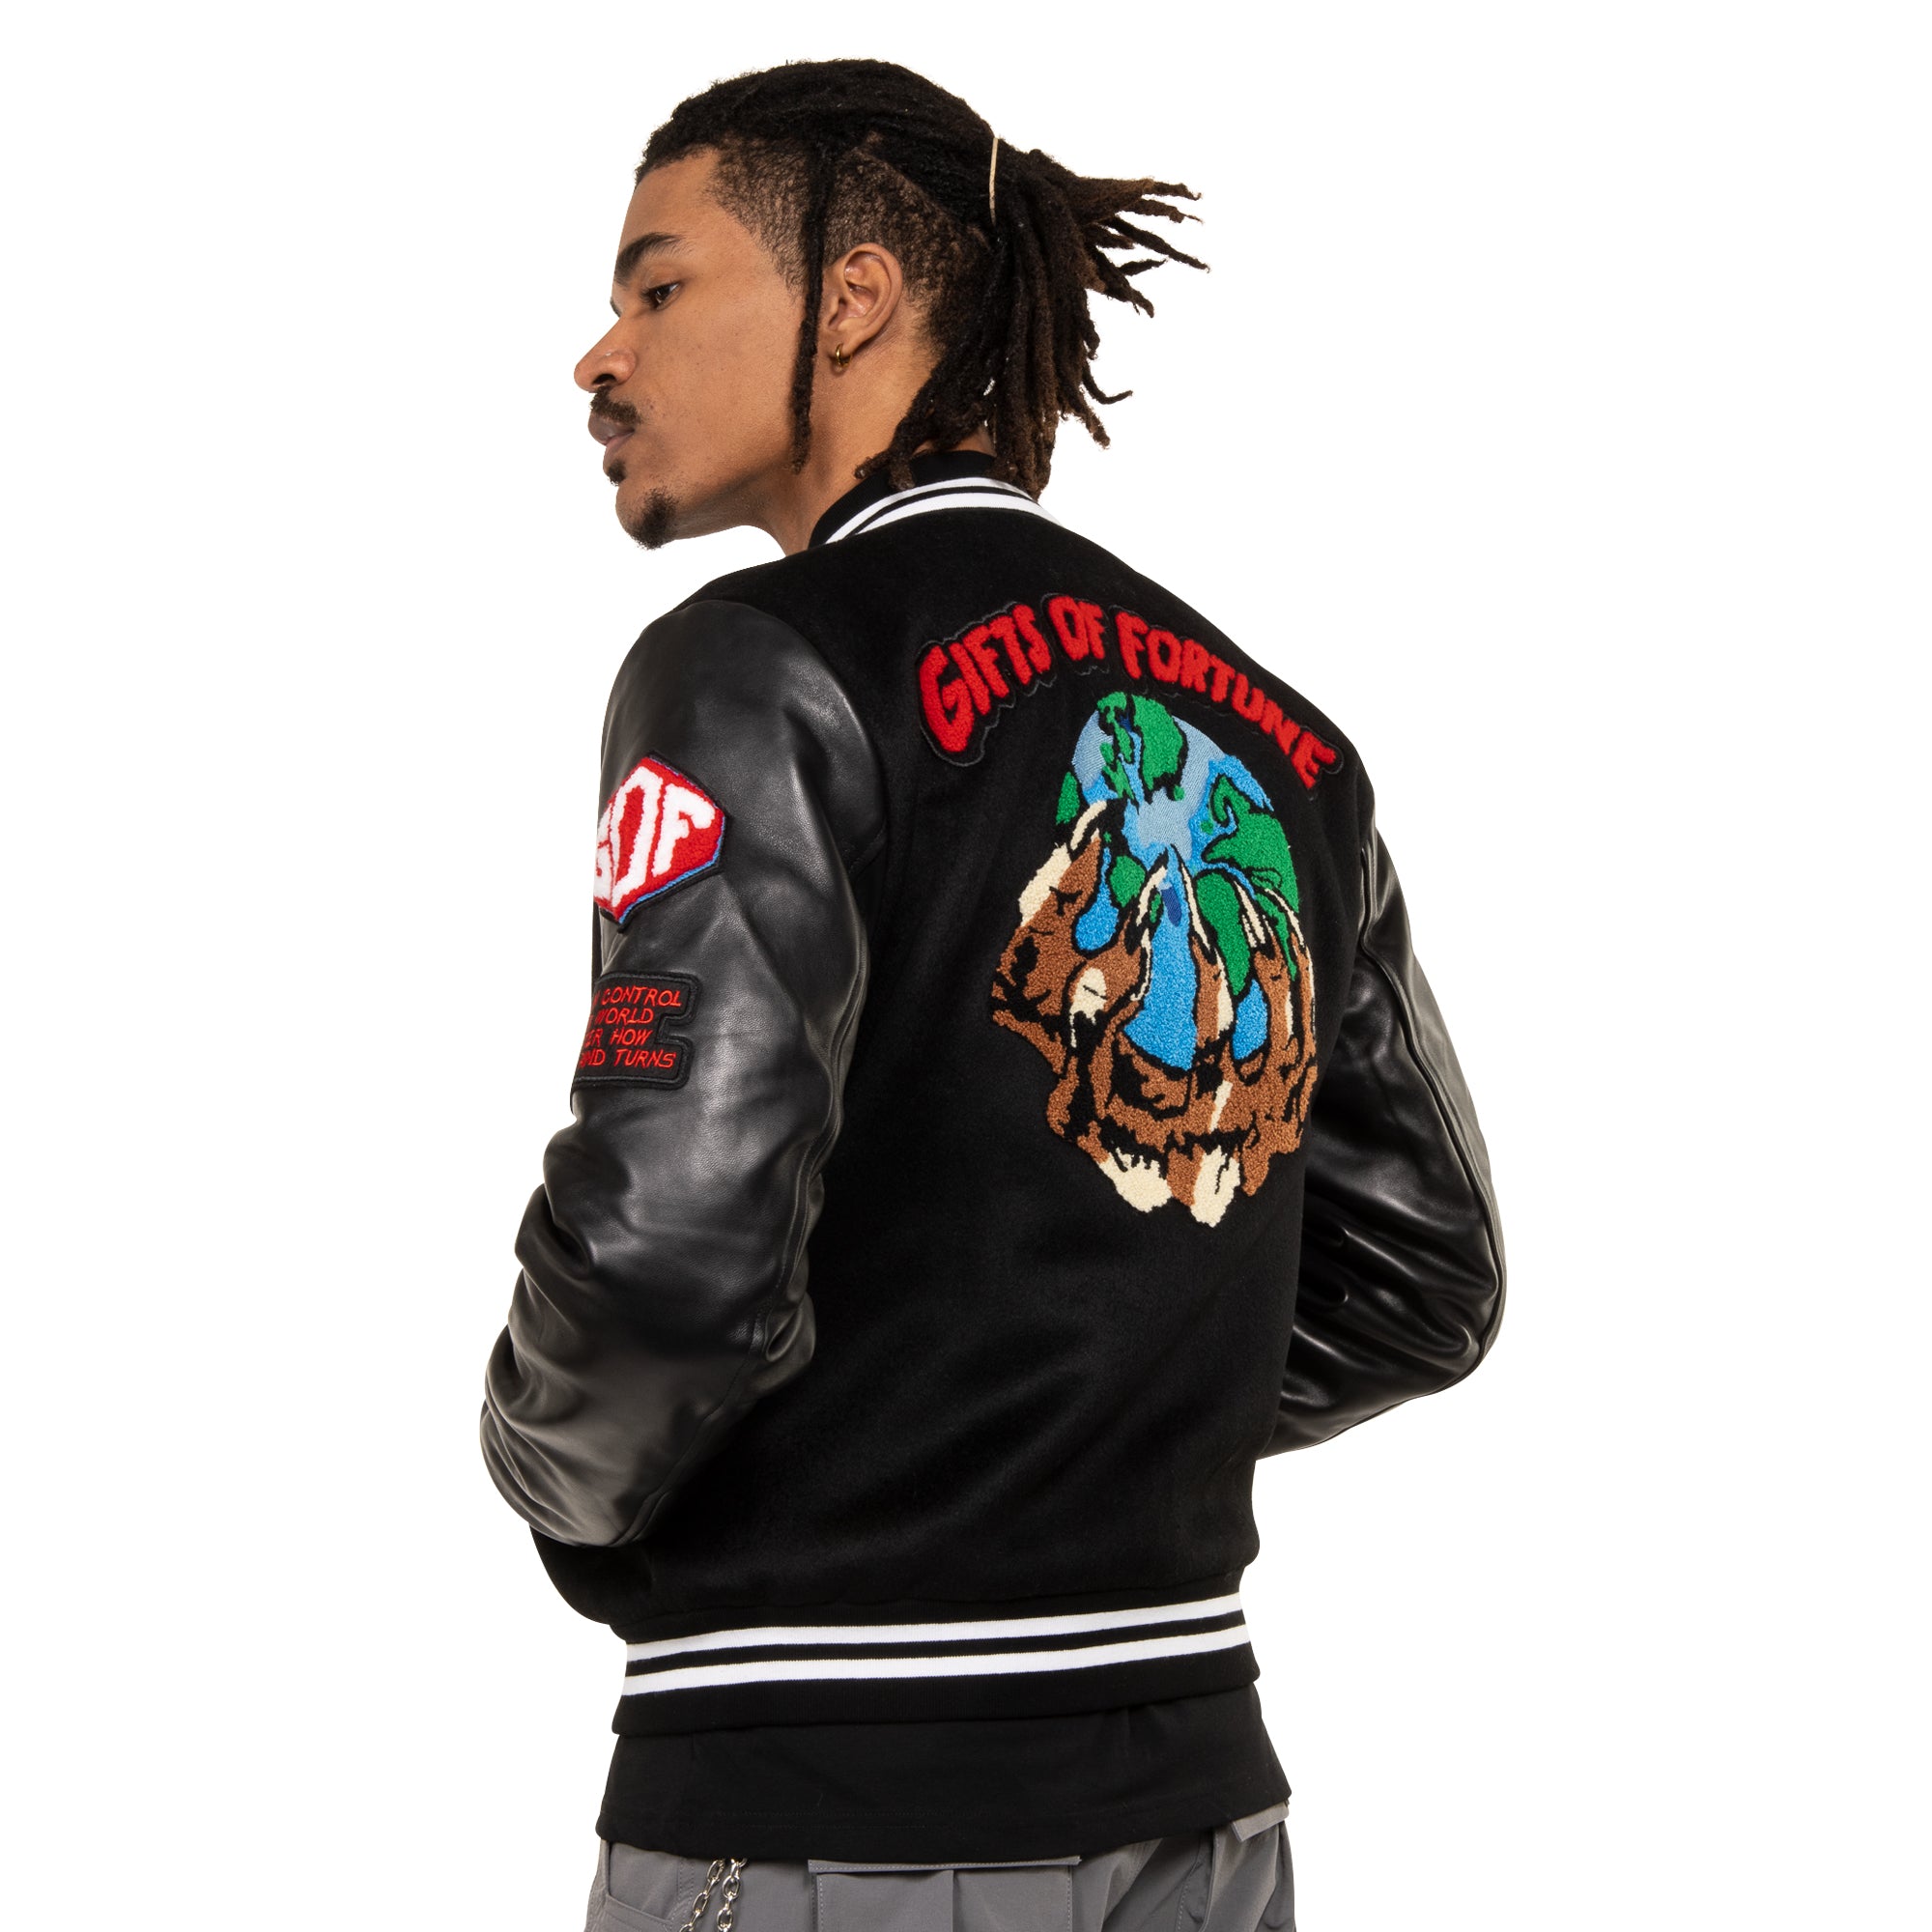 2/25 Drop "The World is Yours" Varsity & More